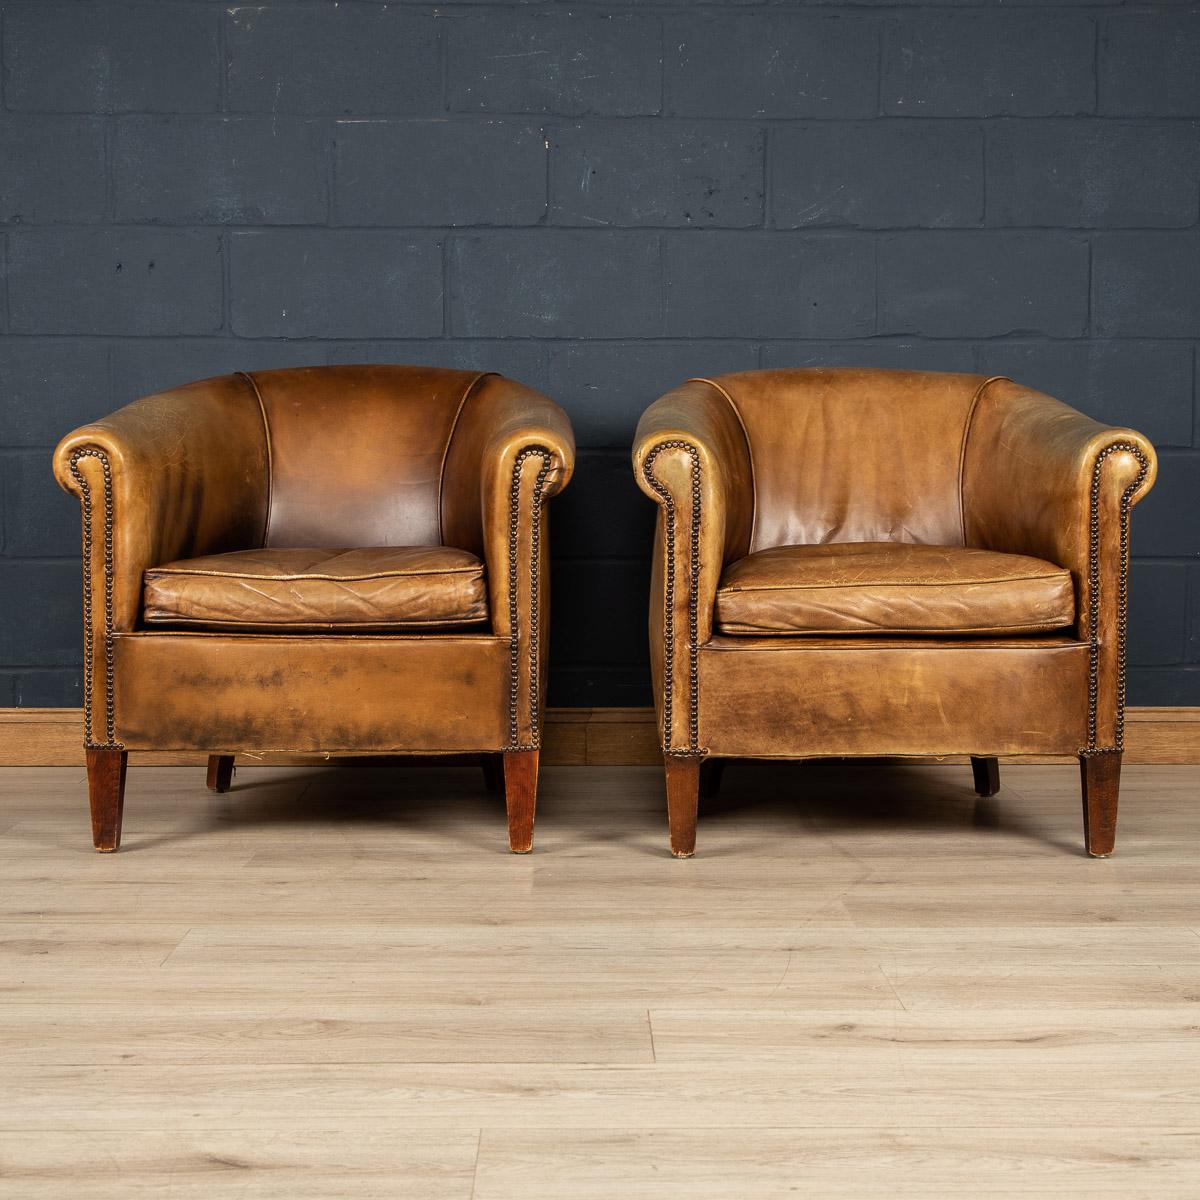 European Late 20th Century Pair of Dutch Leather Club Chairs For Sale